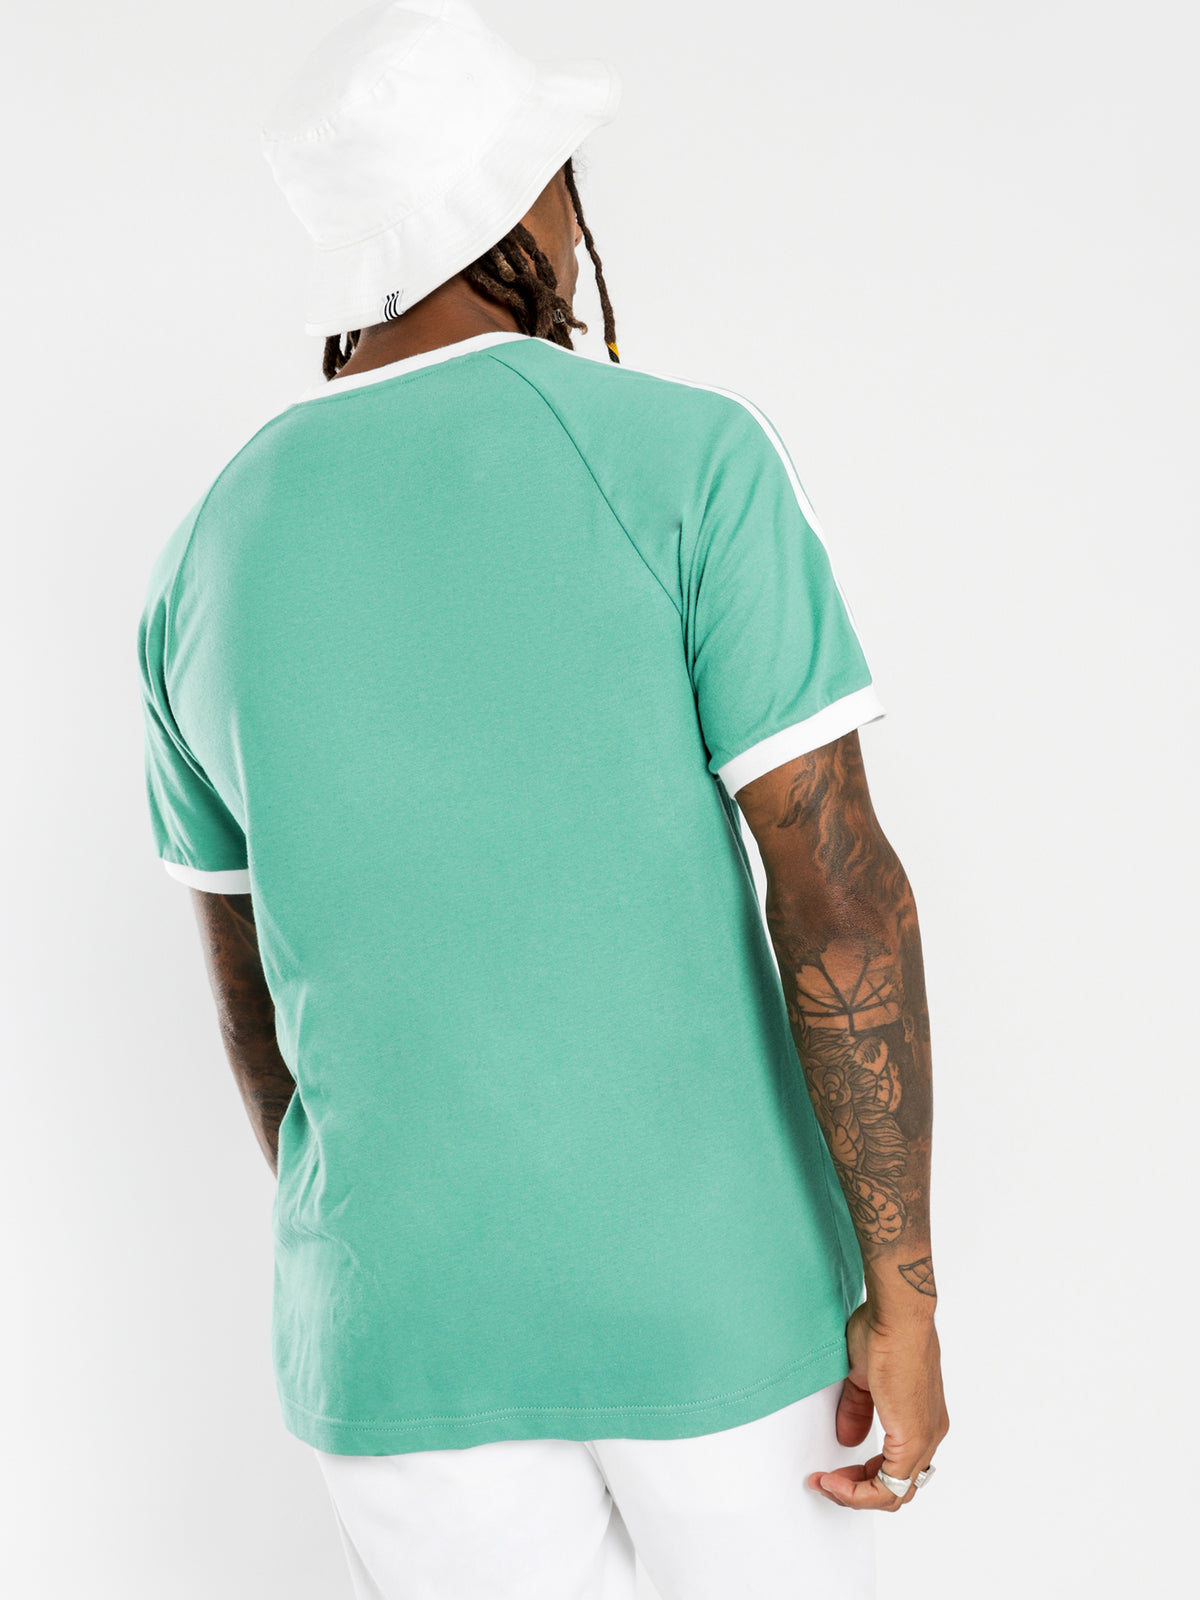 3 Stripes T-Shirt in Teal